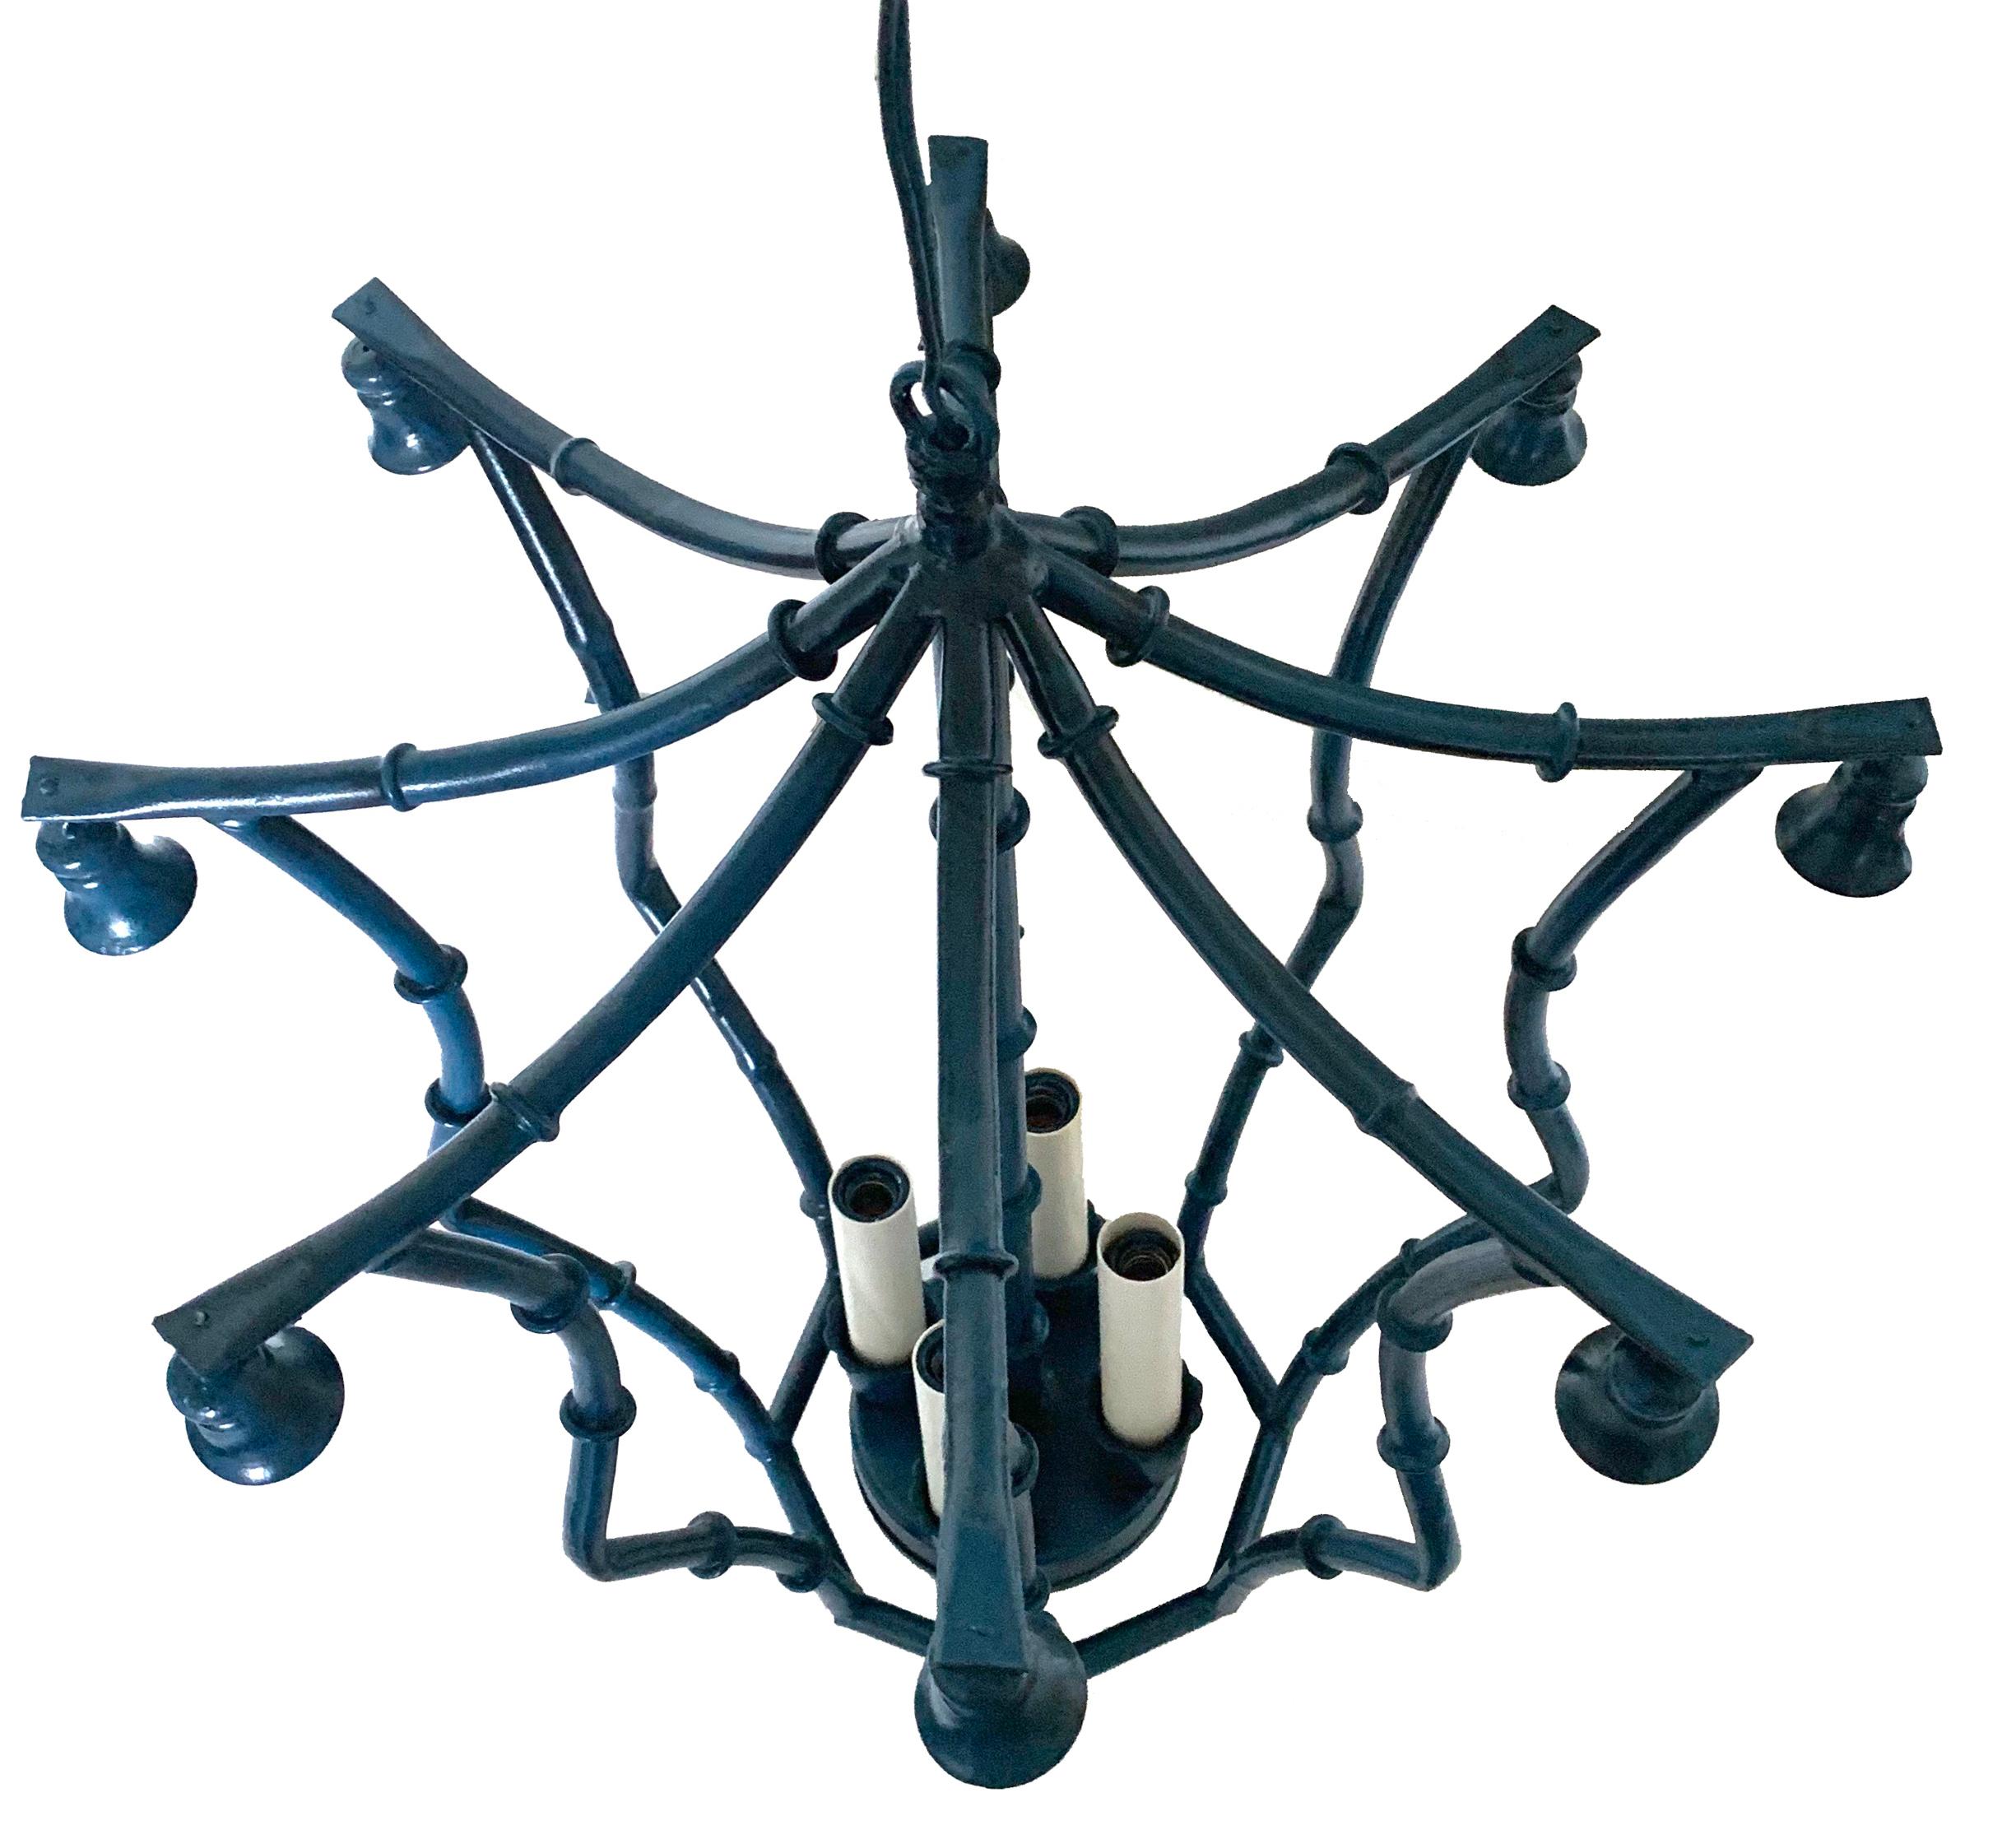 Custom painted bamboo-style chandeliers. Newly painted in Benjamin Moore 'Old Glory' (medium blue). Newly rewired. 36” L chain and canopy are included. Takes four chandelier bulbs.